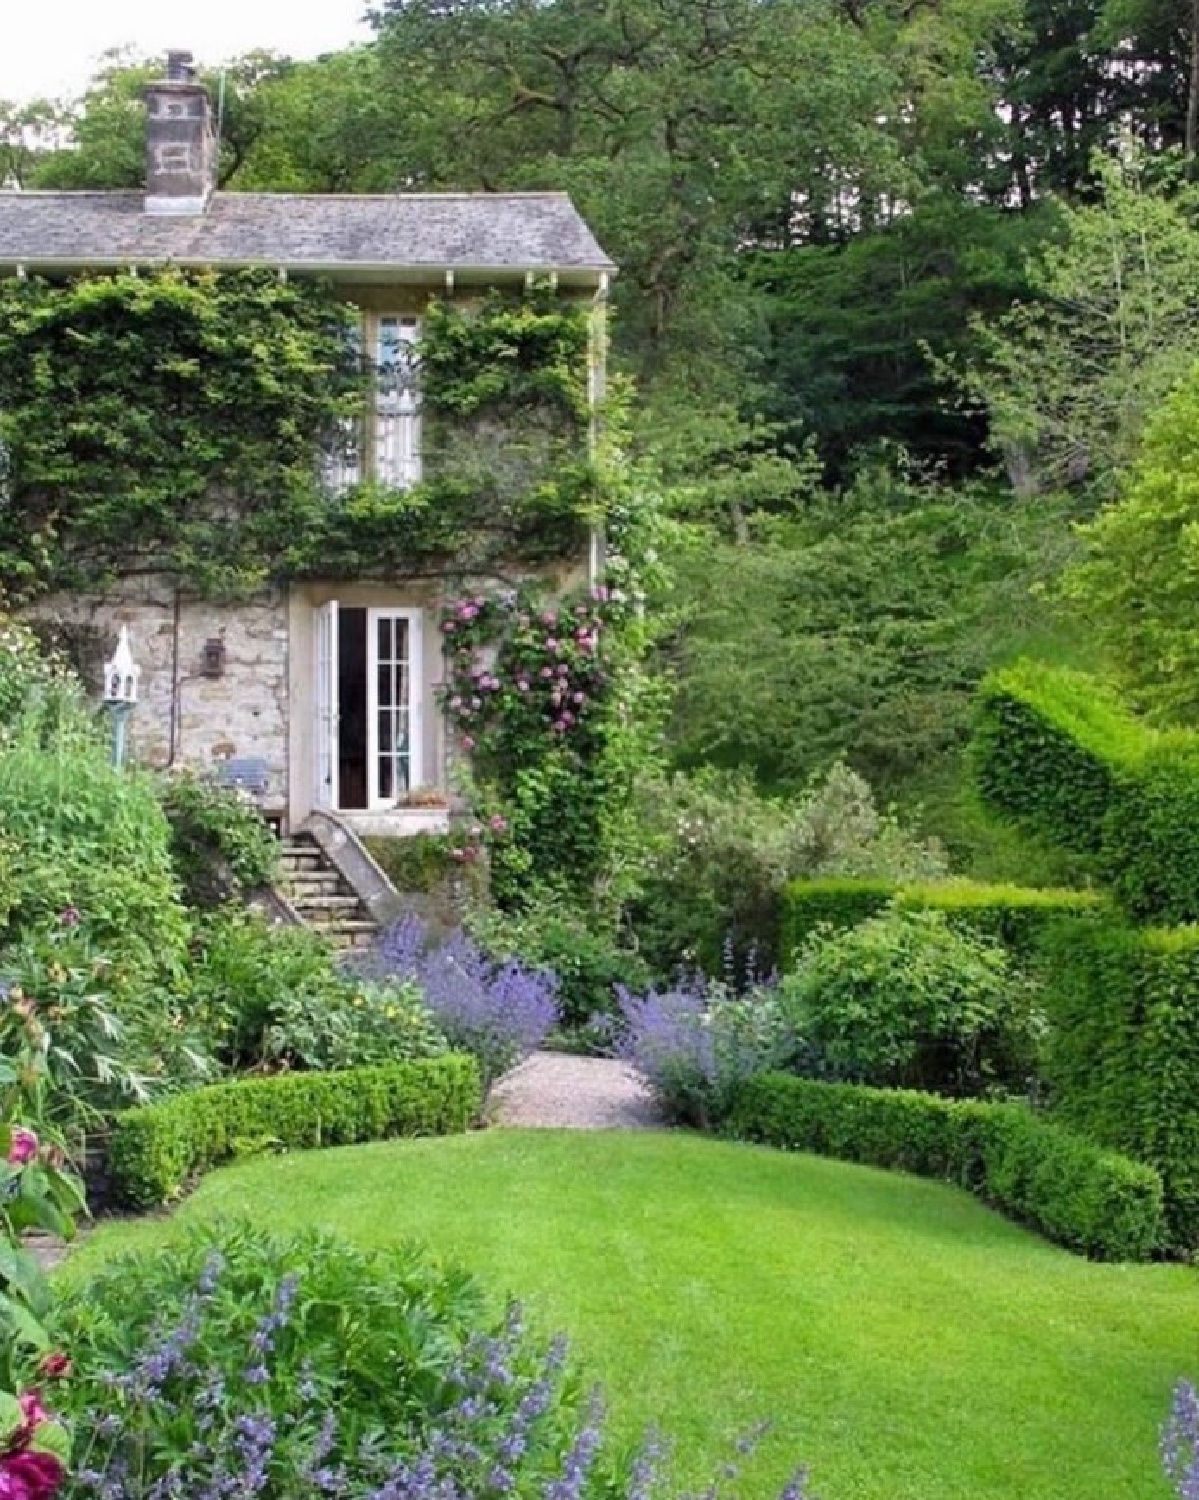 Lovely European country house with lavender garden and lush greenery - @roman_and_ivy. #frenchfarmhouse #countryfrench